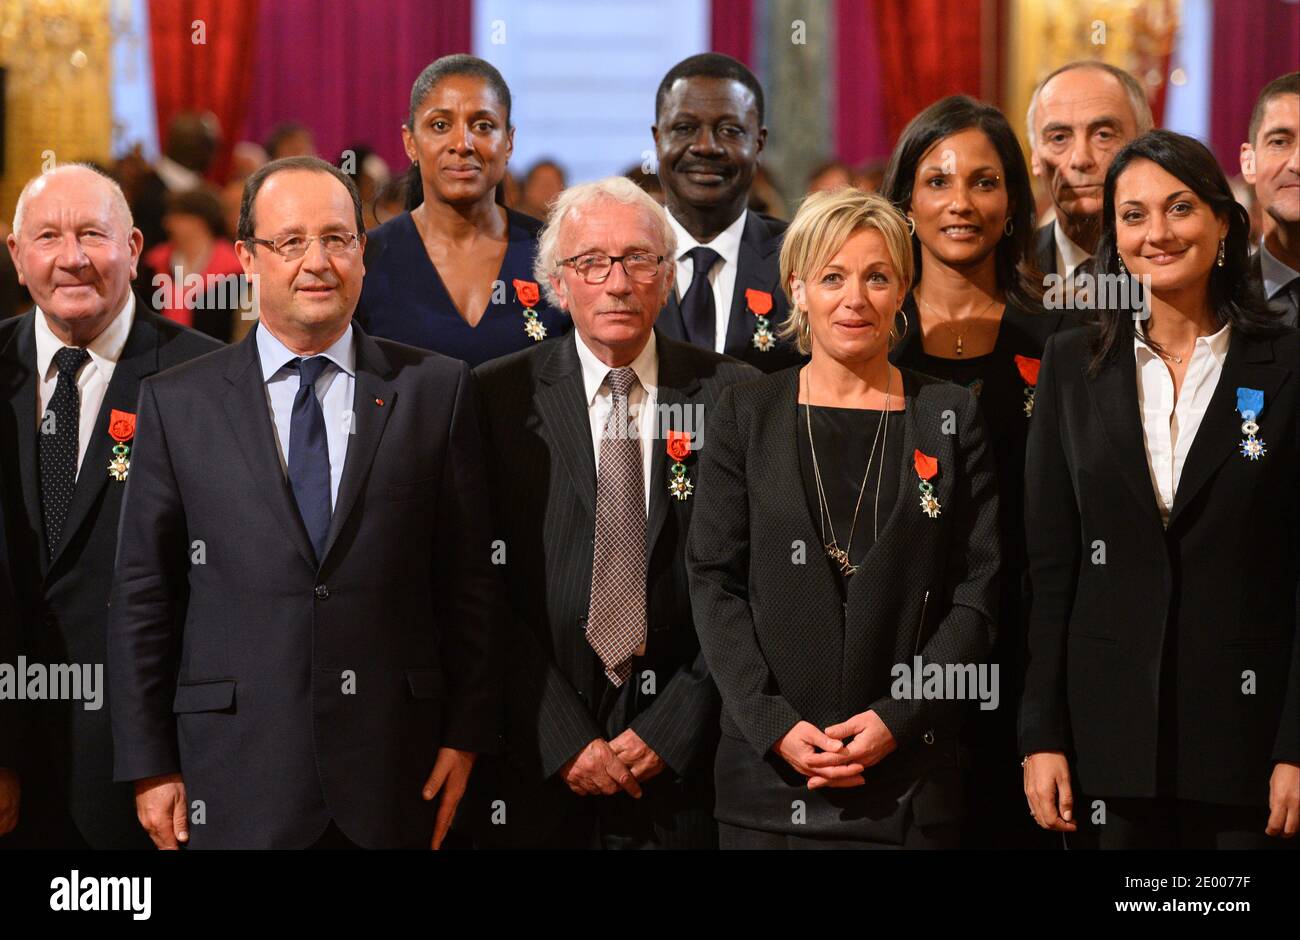 French President Francois Hollande (3rdL) poses with recipients of the Legion of Honor and National Order of Merit insignia during a ceremony to award French sports personalities at the Elysee Palace in Paris, France on October 9, 2013. From left: President of the French Federation of Athletics Bernard Amsalem, former French tennis coach Jean-Claude Perrin, French President Francois Hollande, triple Olympic Champion Marie-Jose Perec, sports journalist Jacques Vendroux, former Olympique de Marseille football club's president Pape Diouf, Olympic Judo champion Cecile Nowak-Grasso, 4x100m World ch Stock Photo